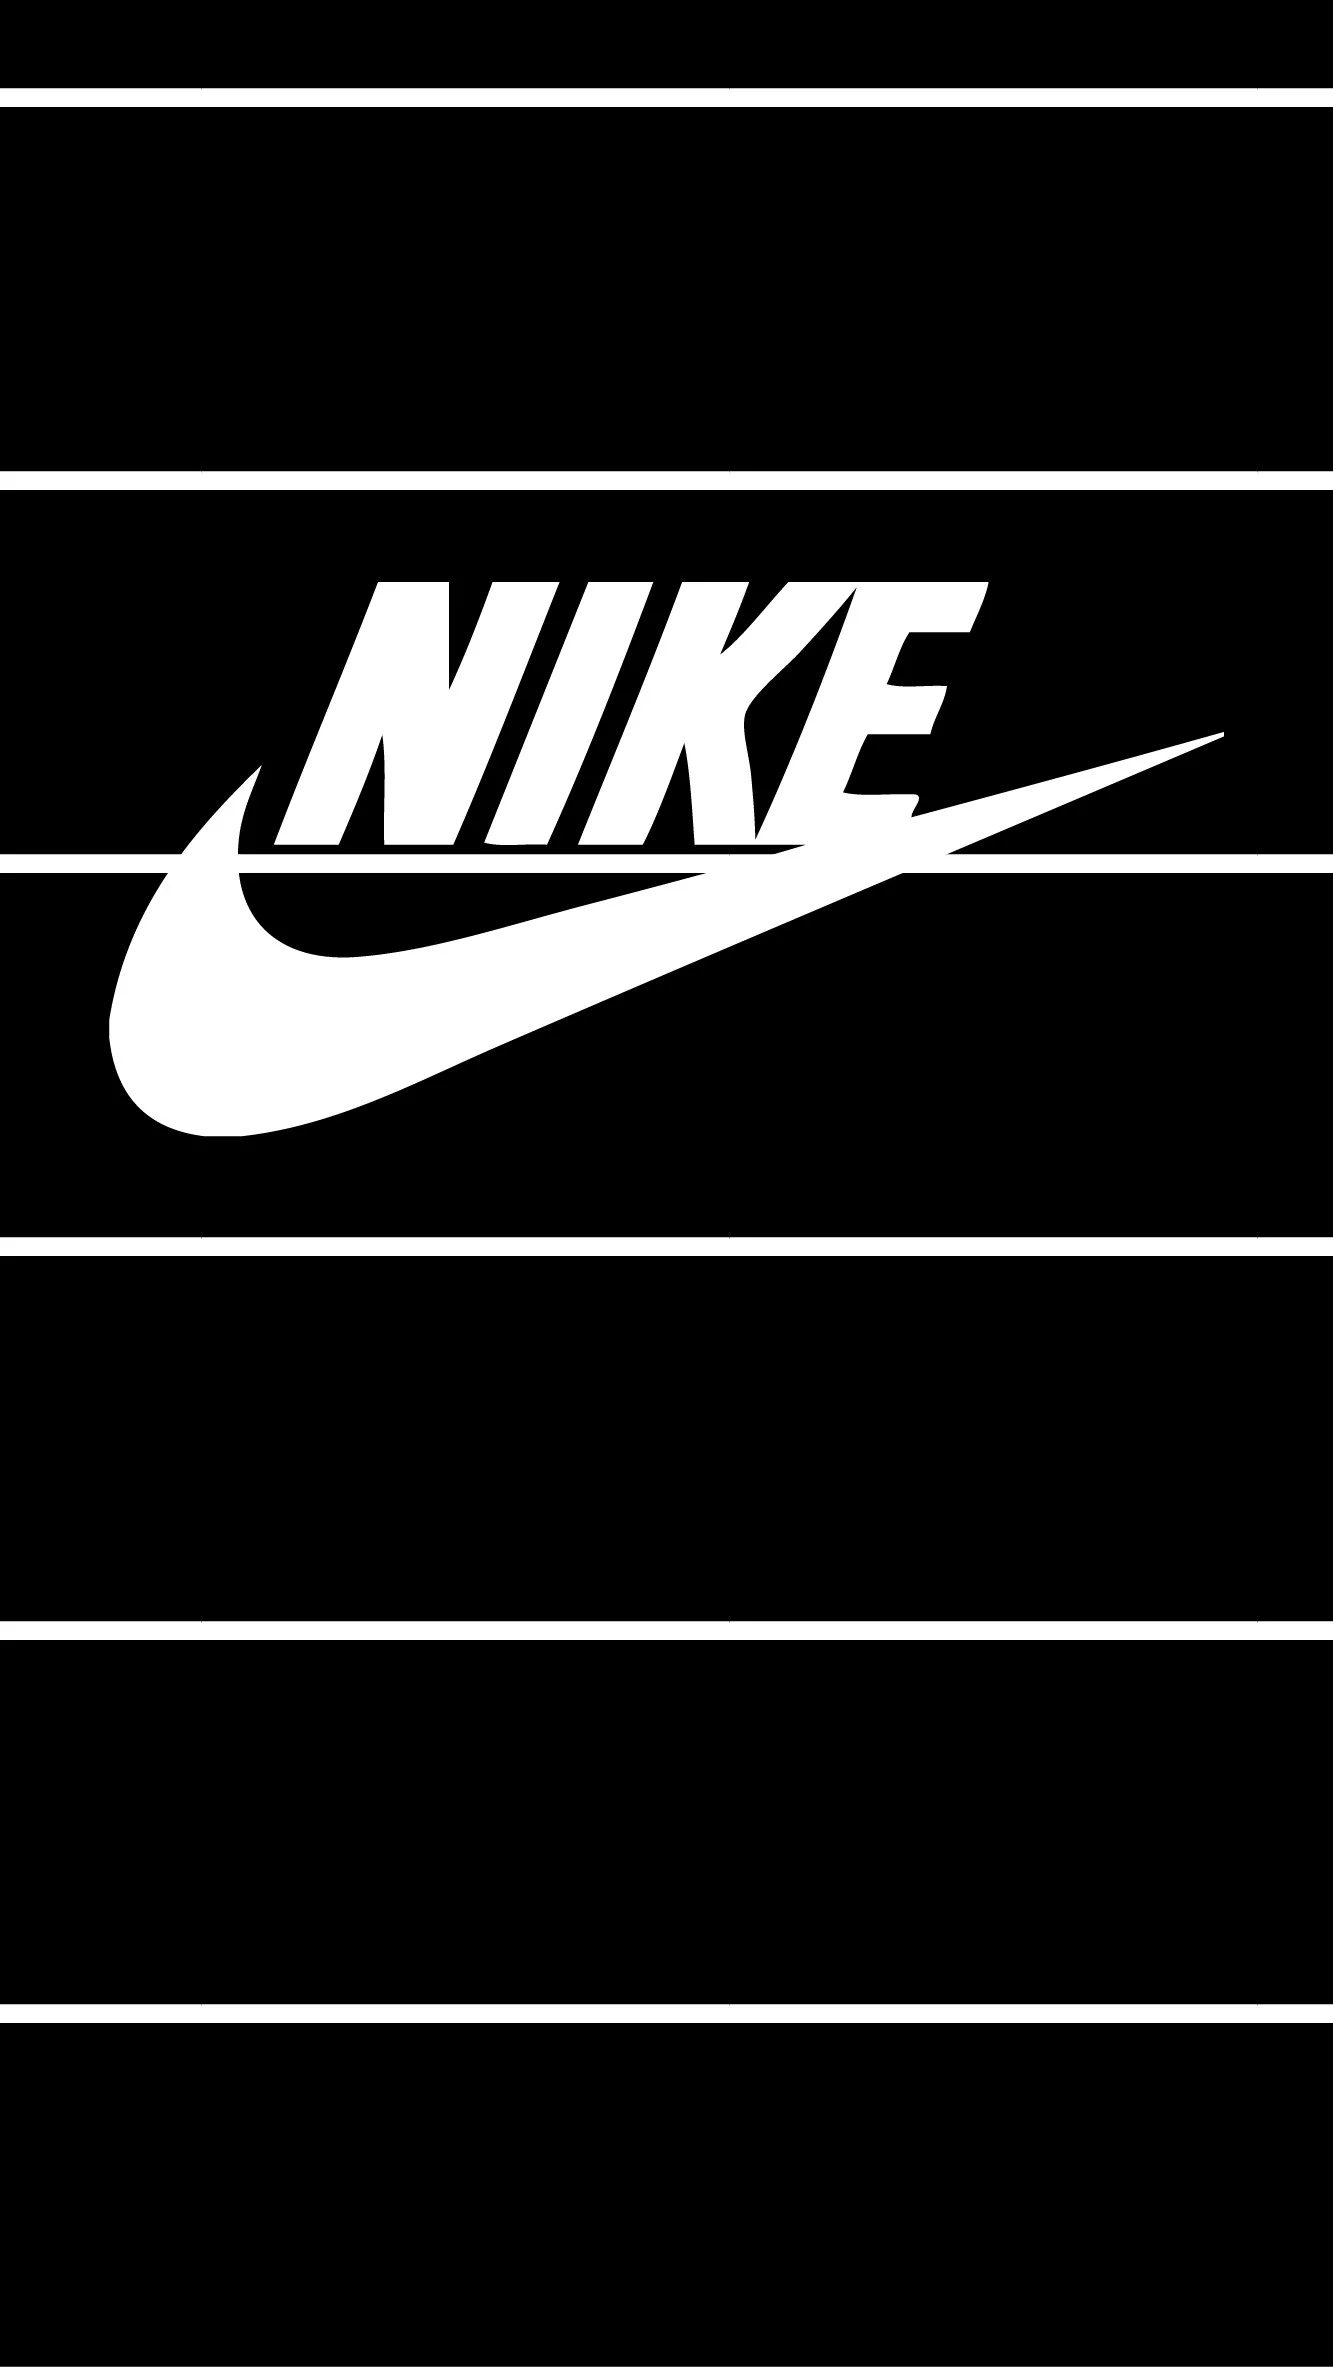 Explore Nike Iphone and more!